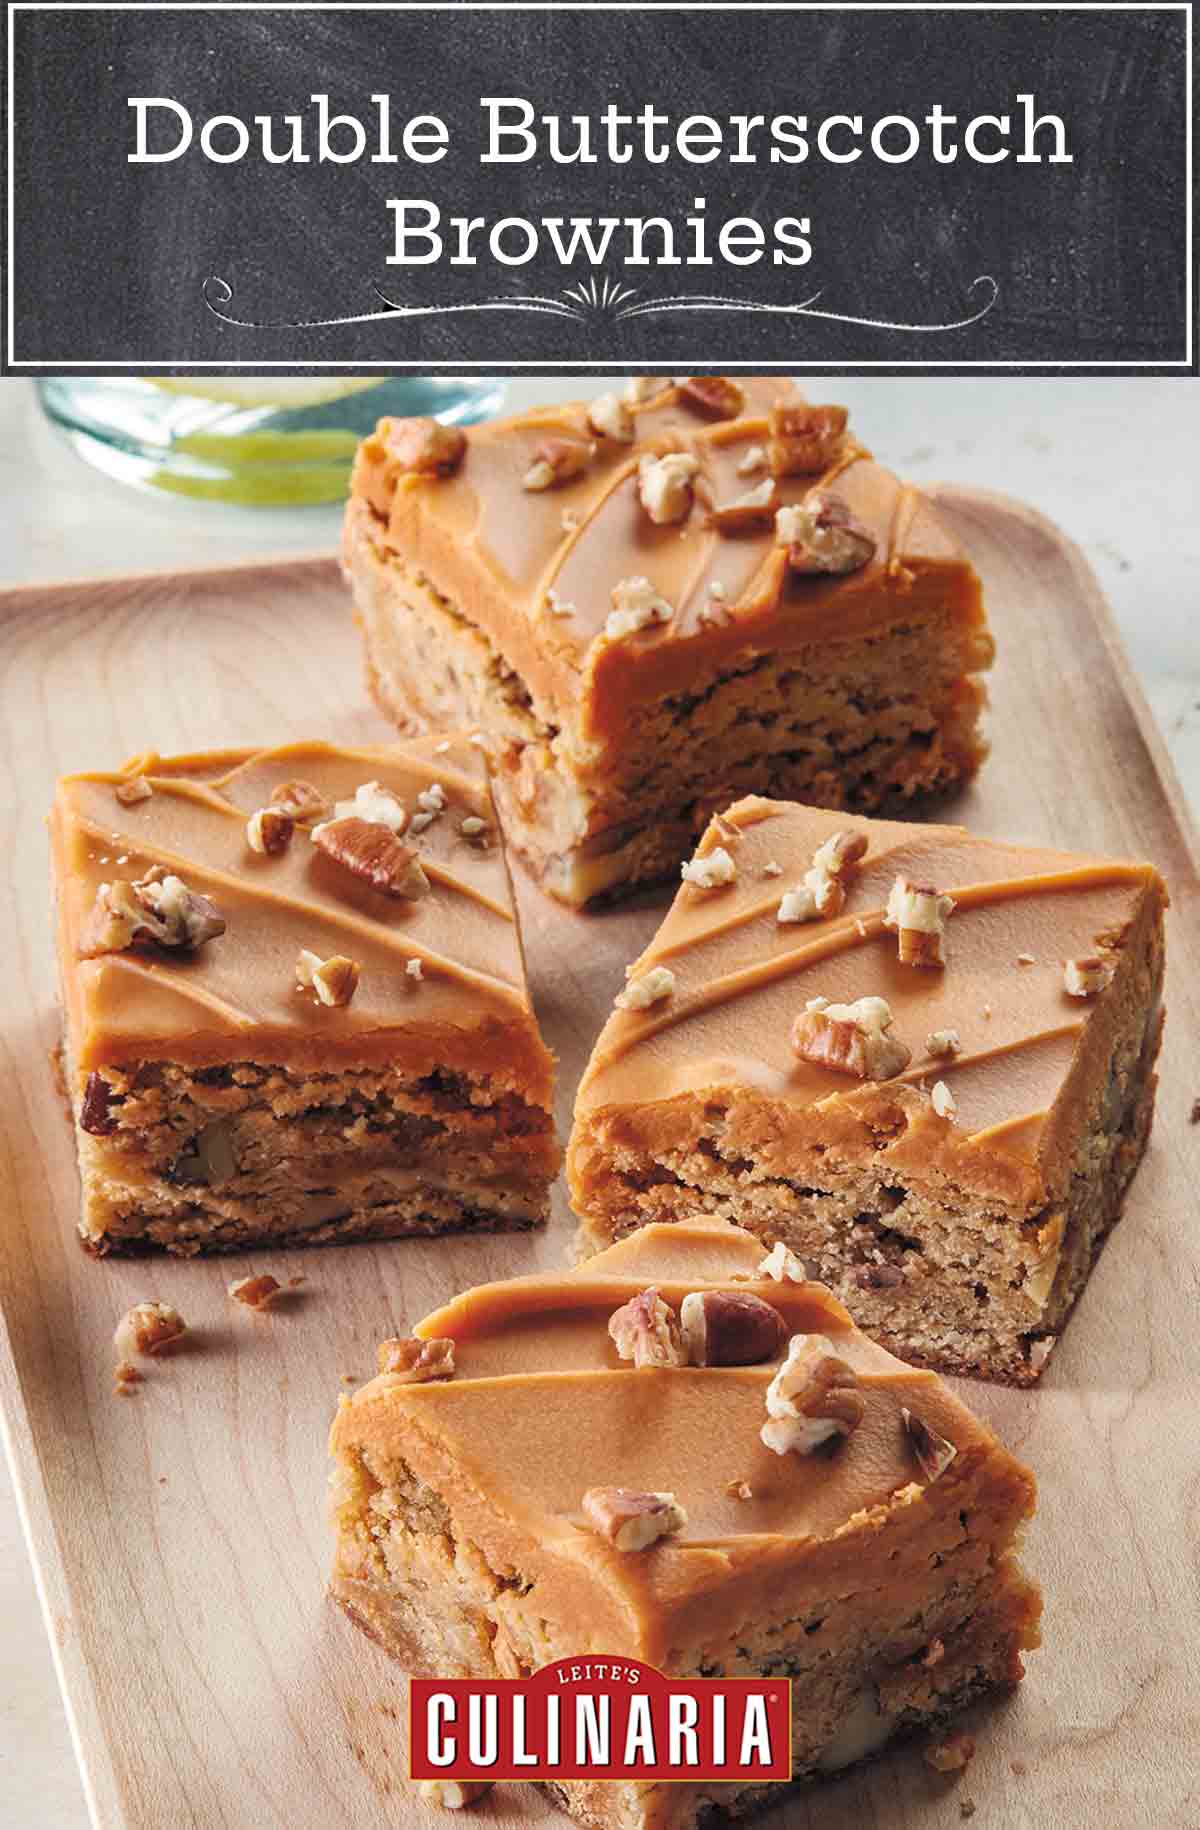 A wooden tray with 4 squares of double butterscotch blondies, with nuts sprinkled around them.